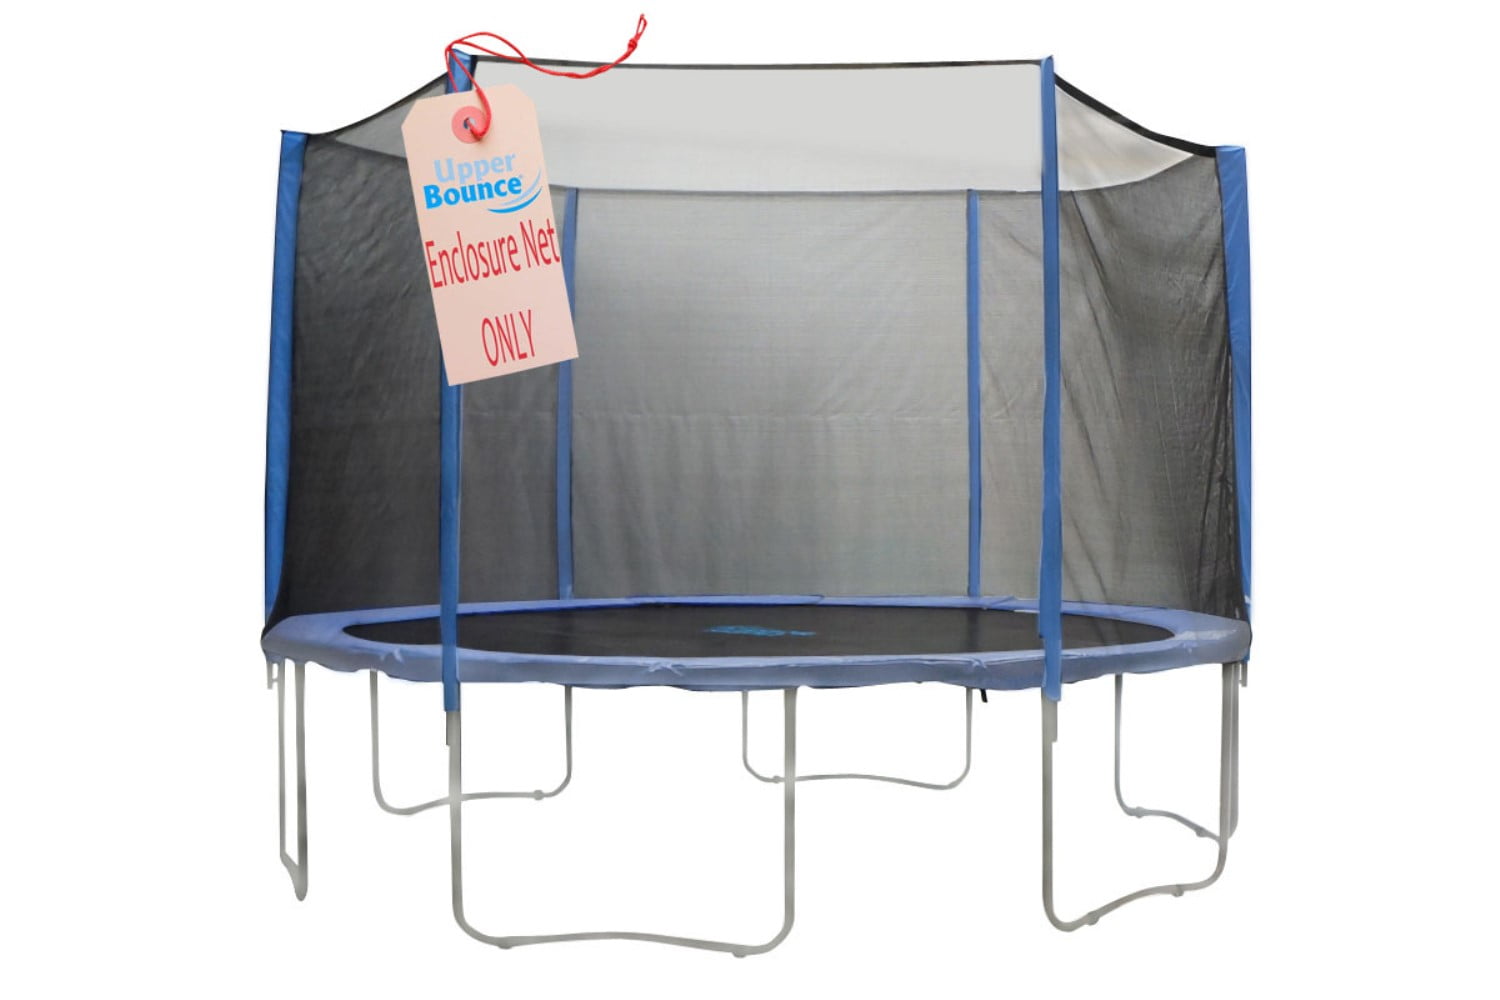 Using 4 Straight Poles NET ONLY Upper Bounce Trampoline Replacement Enclosure Safety Net Fits for 6 FT Round Frames Installs Outside of Frame 